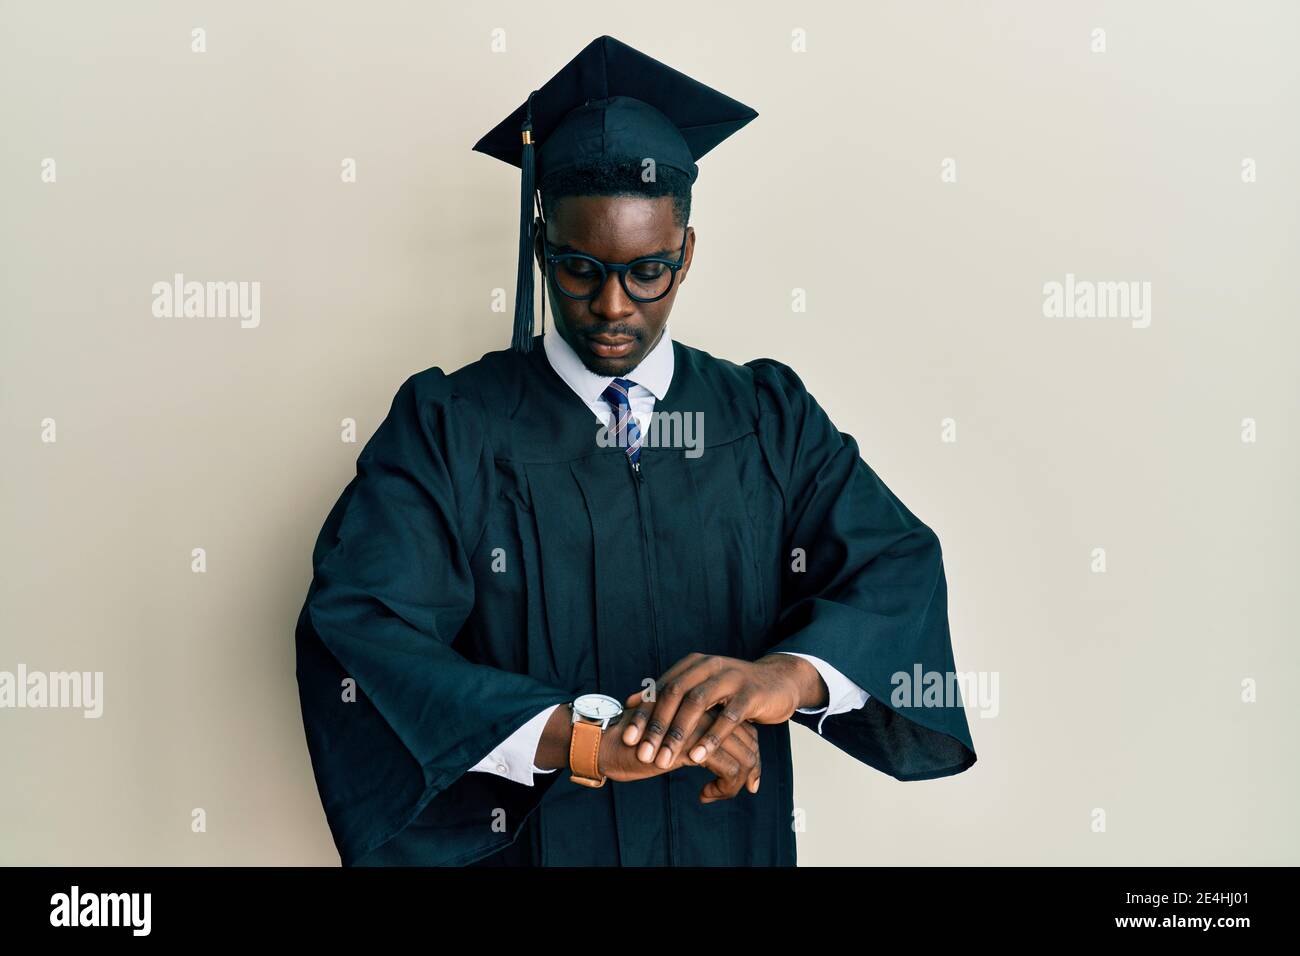 Handsome black man wearing graduation cap and ceremony robe checking the  time on wrist watch, relaxed and confident Stock Photo - Alamy